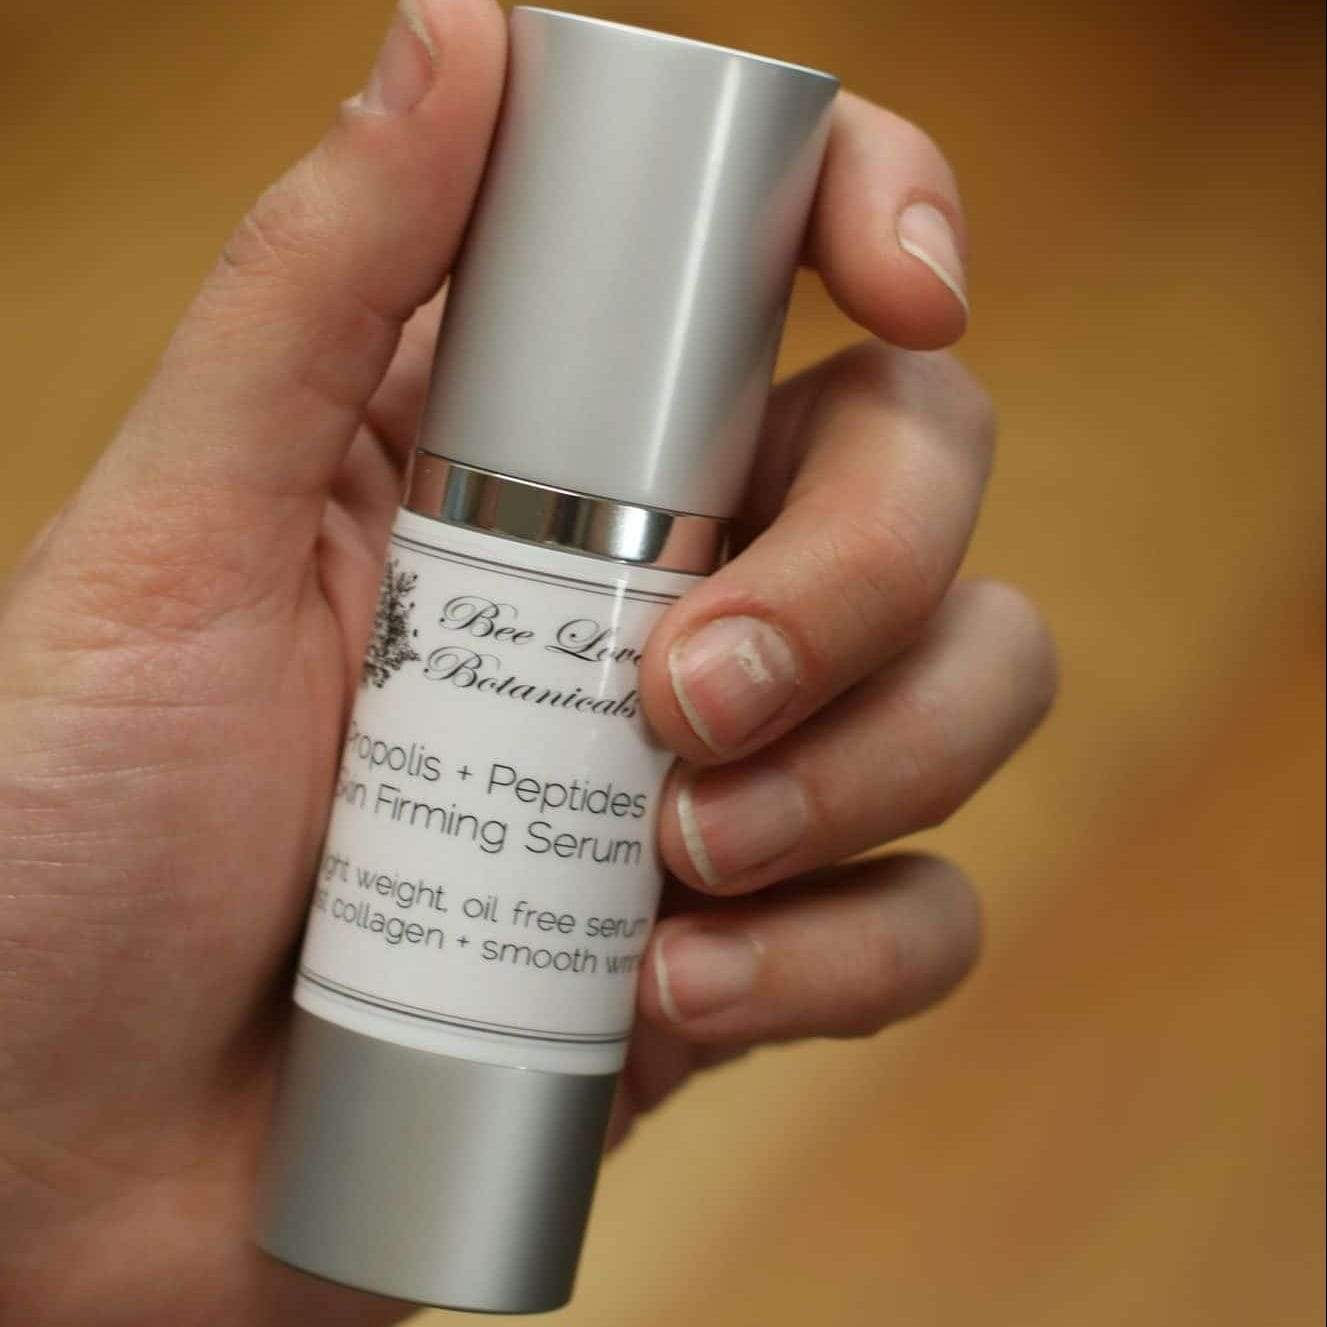 Propolis and Peptides Skin Firming Serum